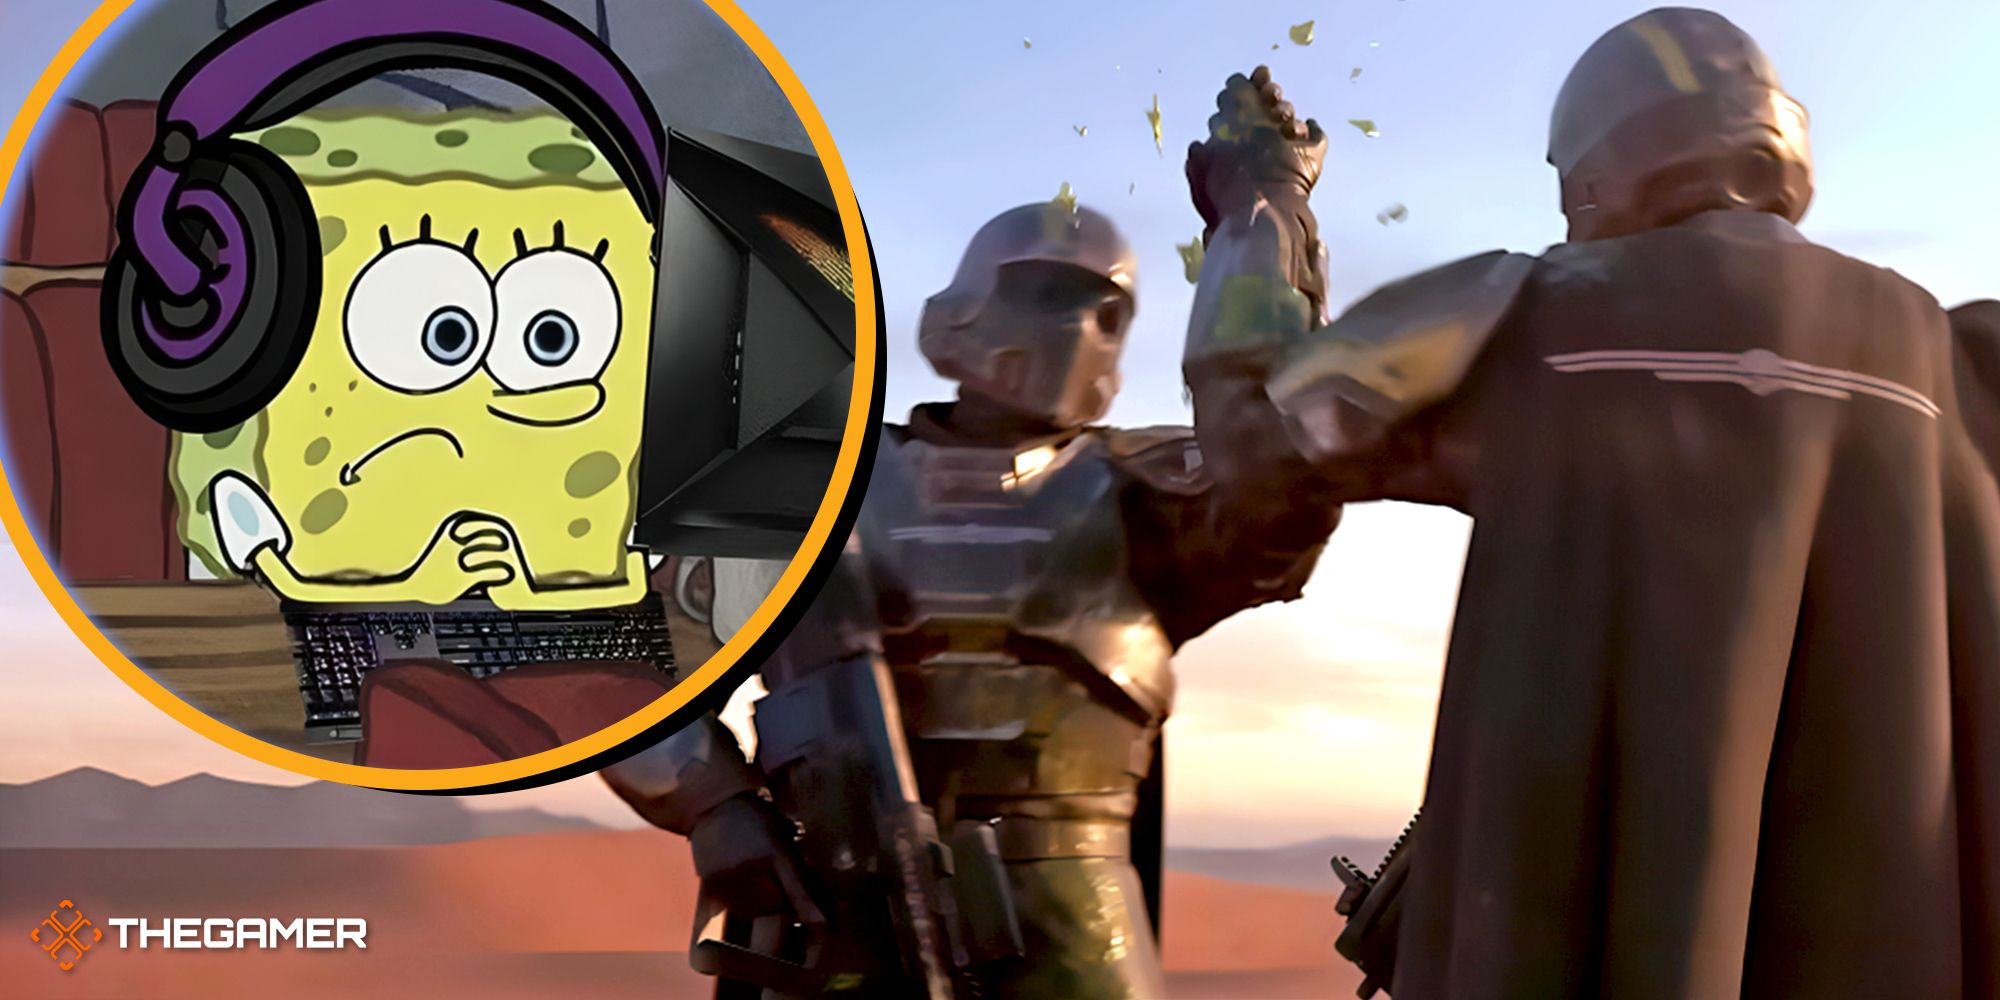 The background is two Helldivers high-diving, green goo splashing from their gloves. The top left corner has a yellow circle with Spongebob sitting at a computer with headhones on, clasping his hands